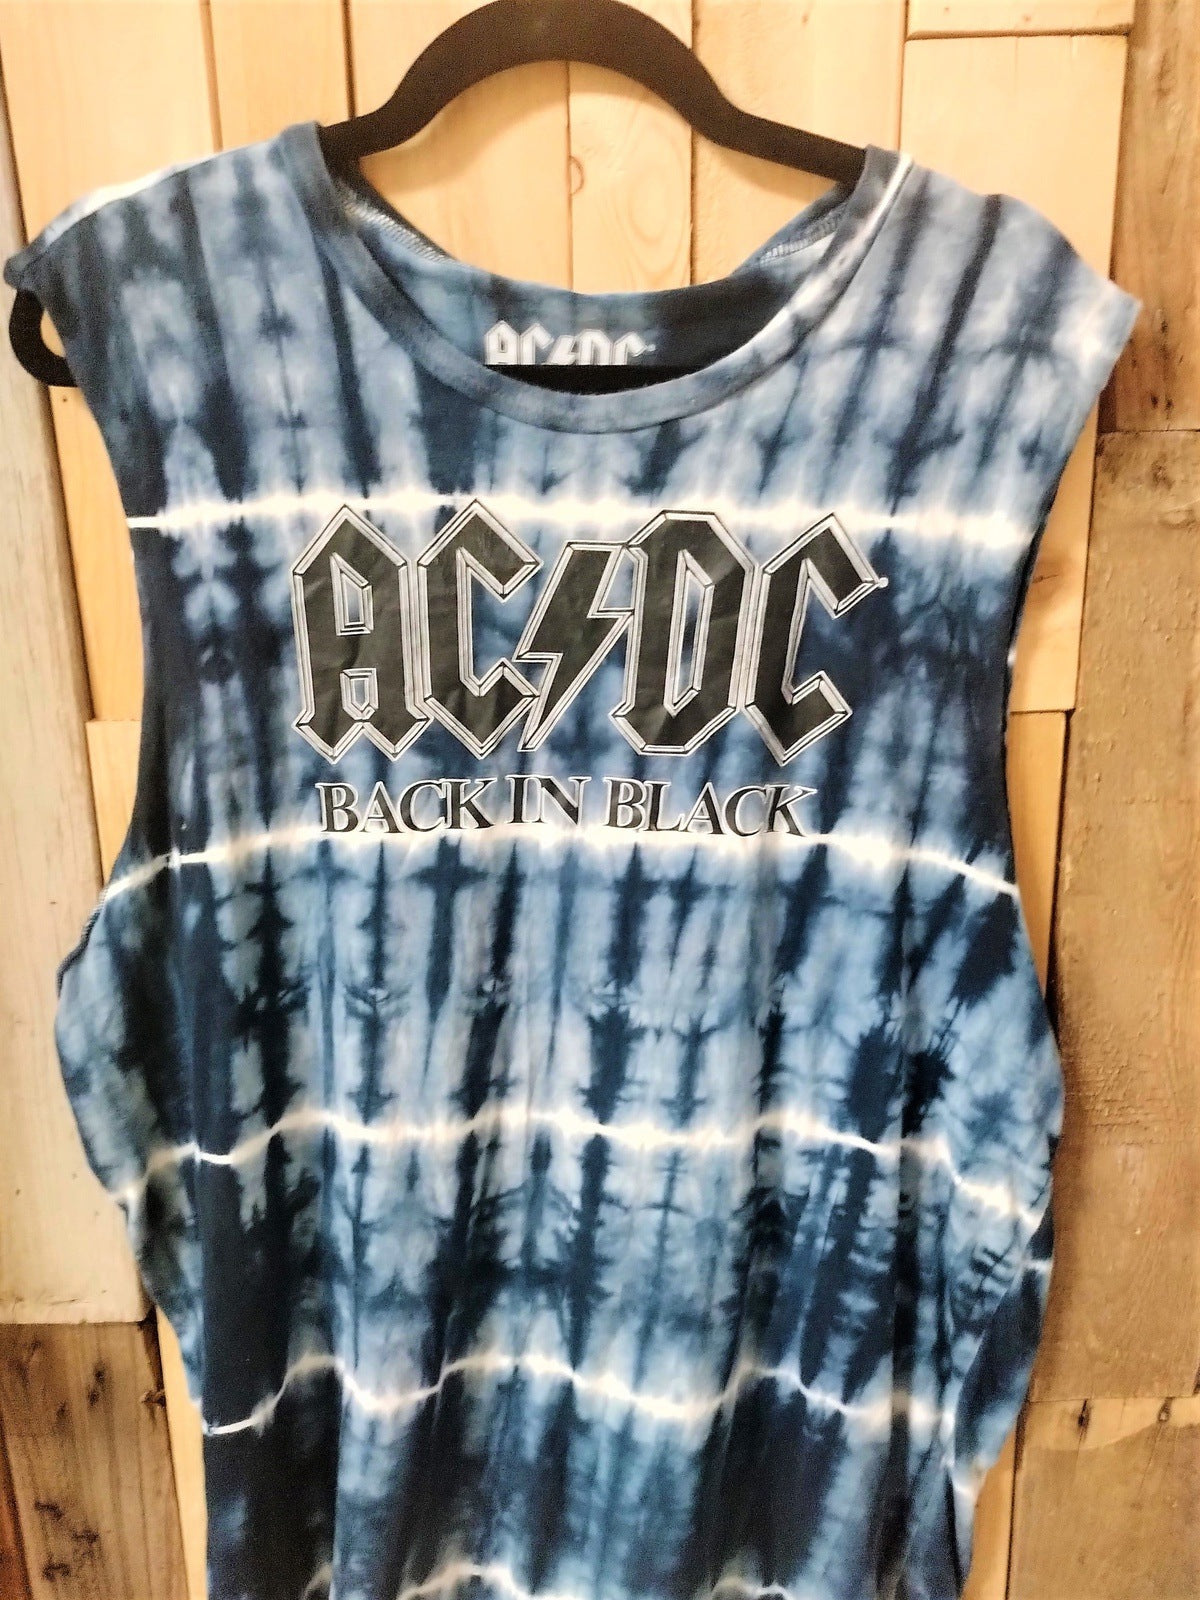 ACDC Back in Black Tie Die Sleeveless Tee Shirt Size XL